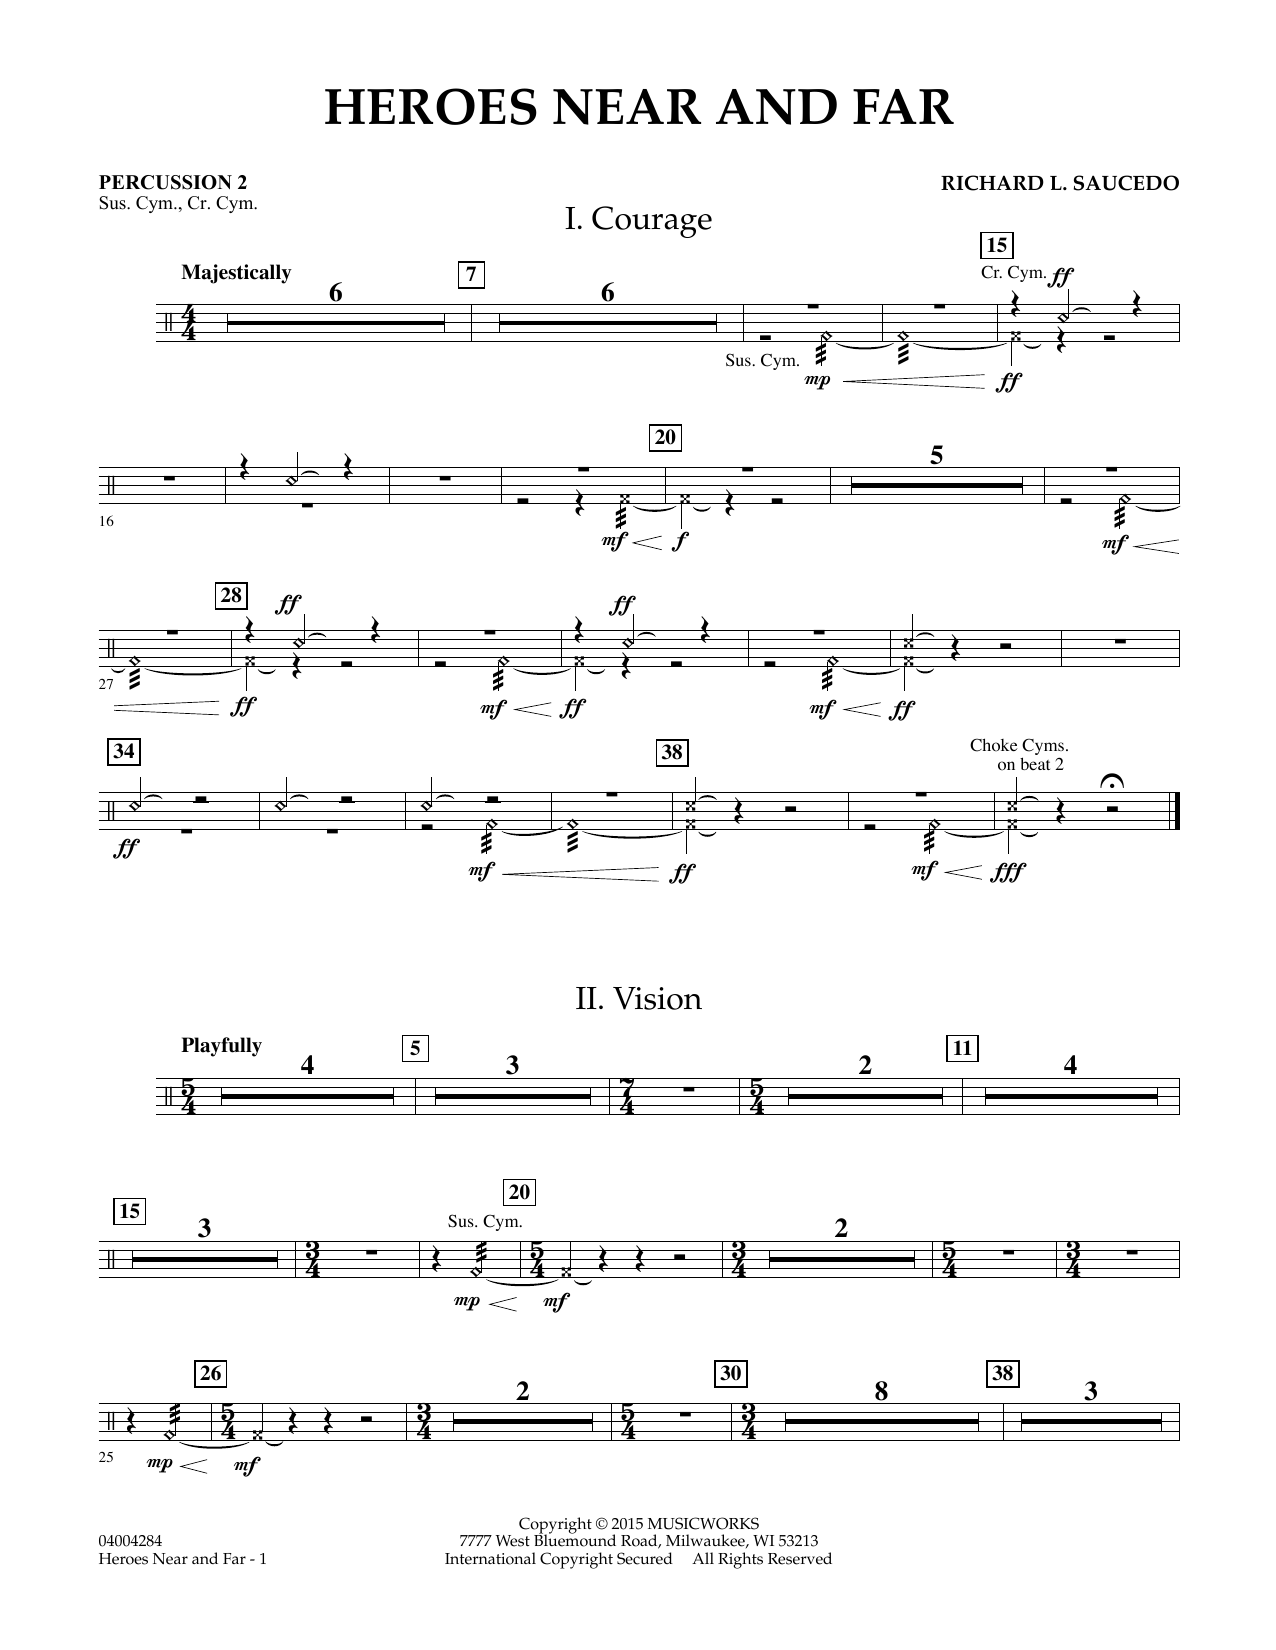 Richard L. Saucedo Heroes Near and Far - Percussion 2 sheet music notes and chords. Download Printable PDF.